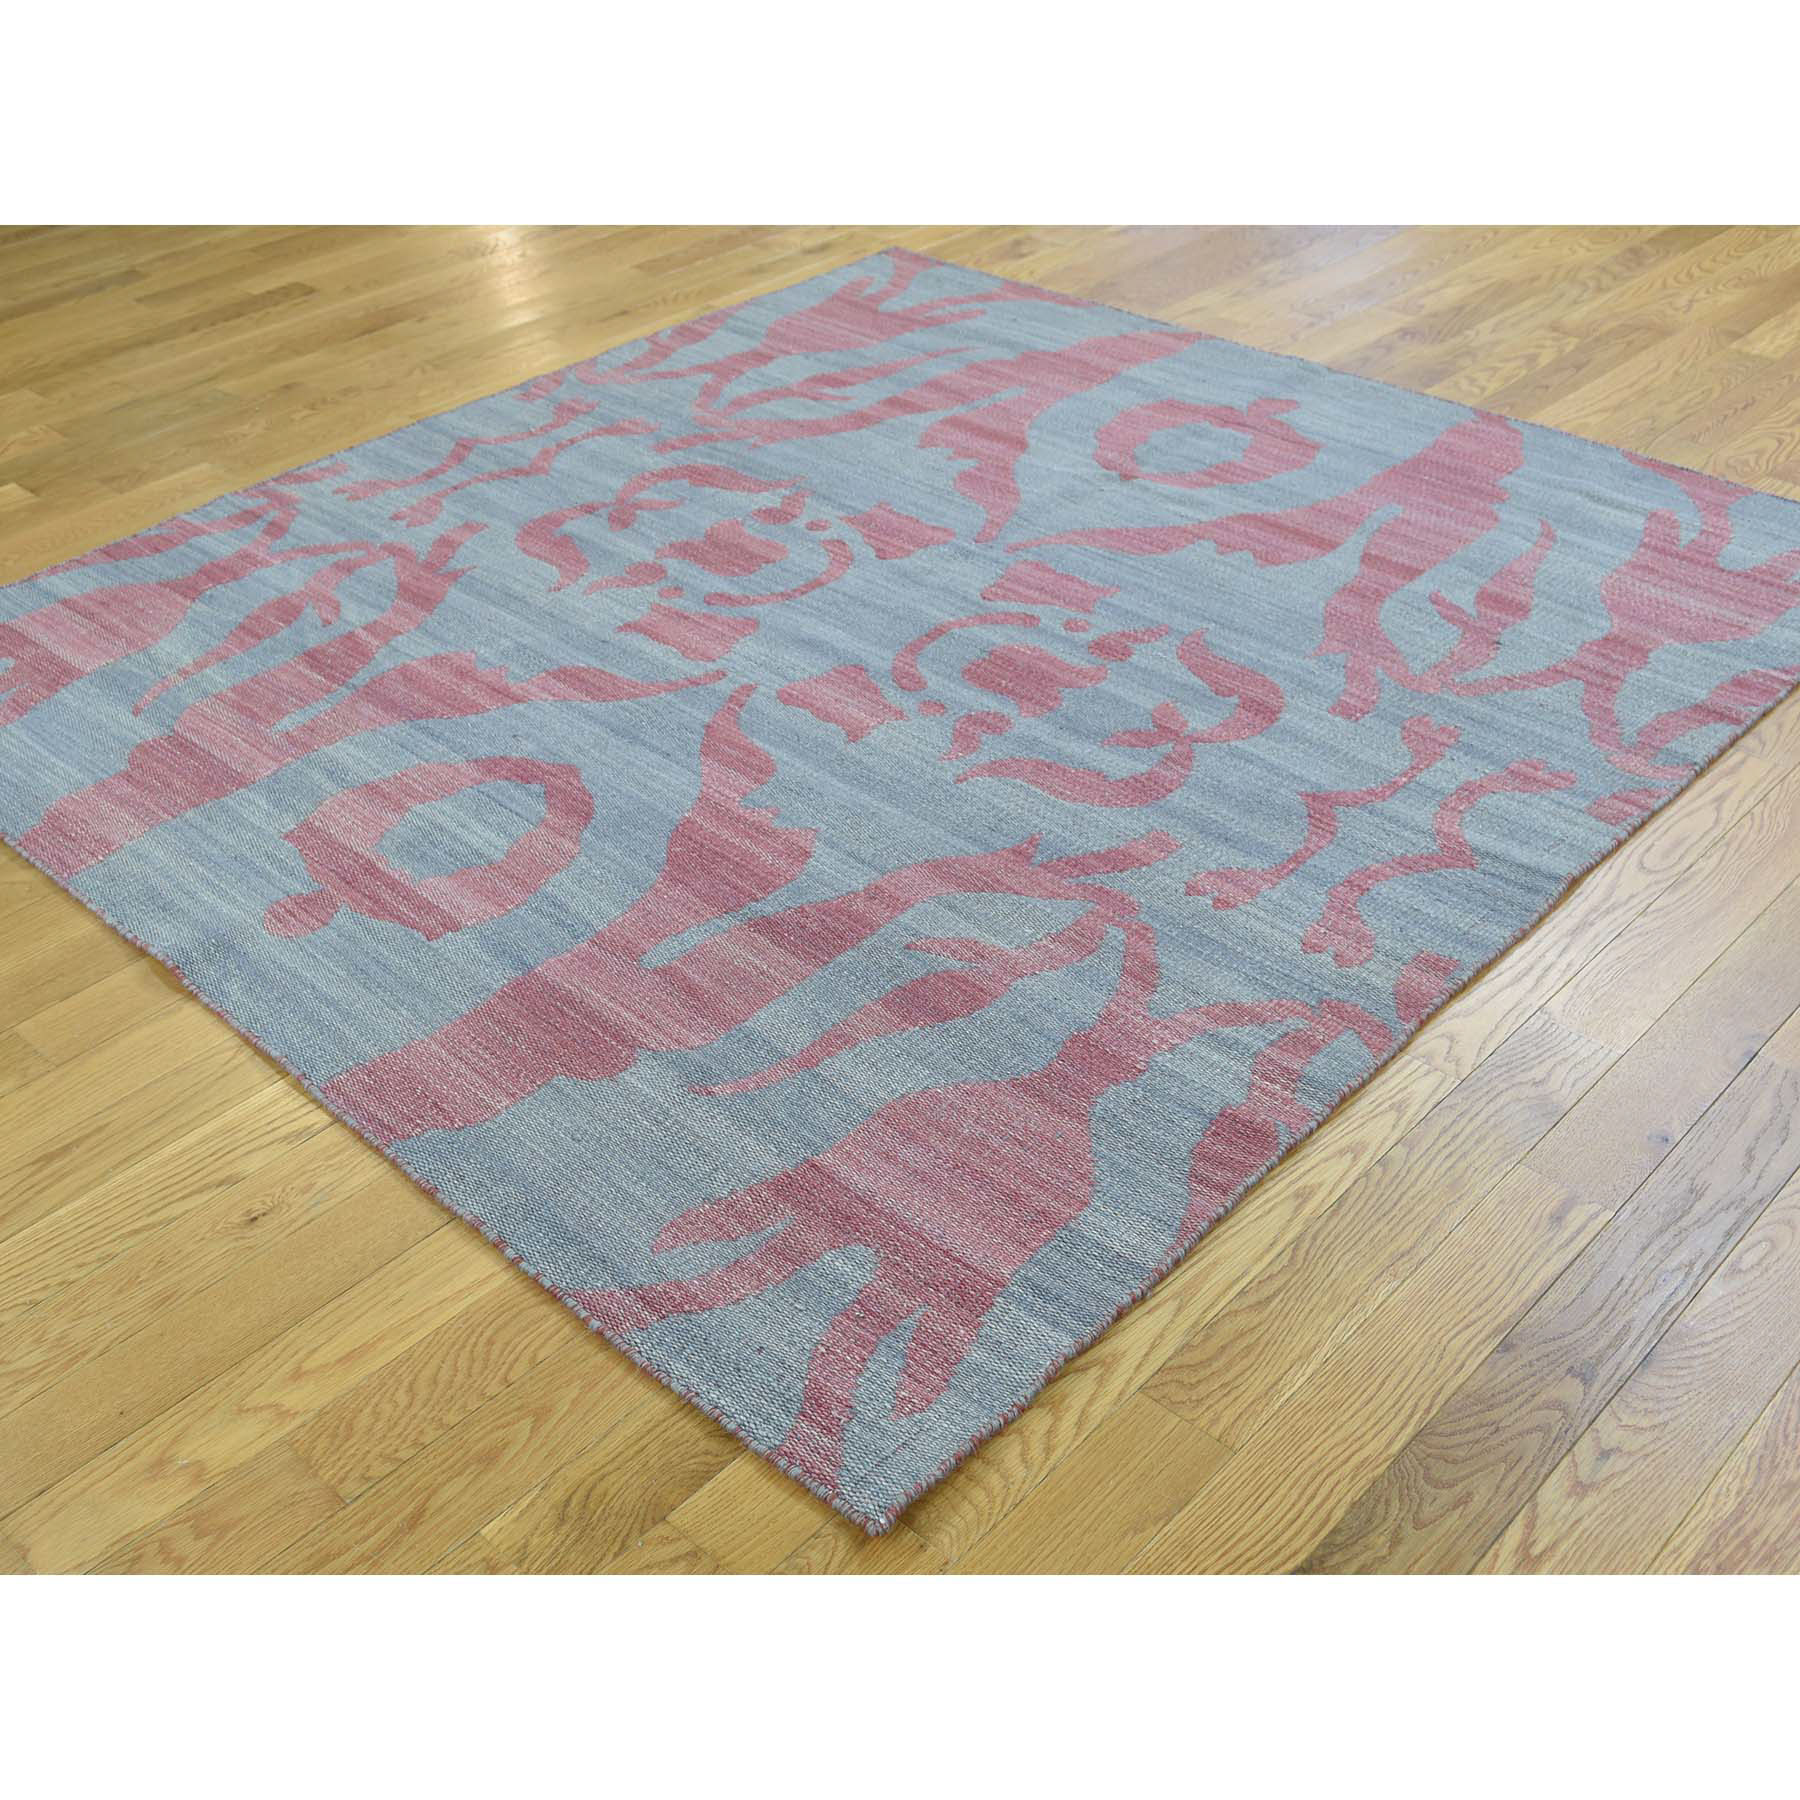 6-x6- Hand Woven Flat Weave Pure Wool Reversible Kilim Square Rug 